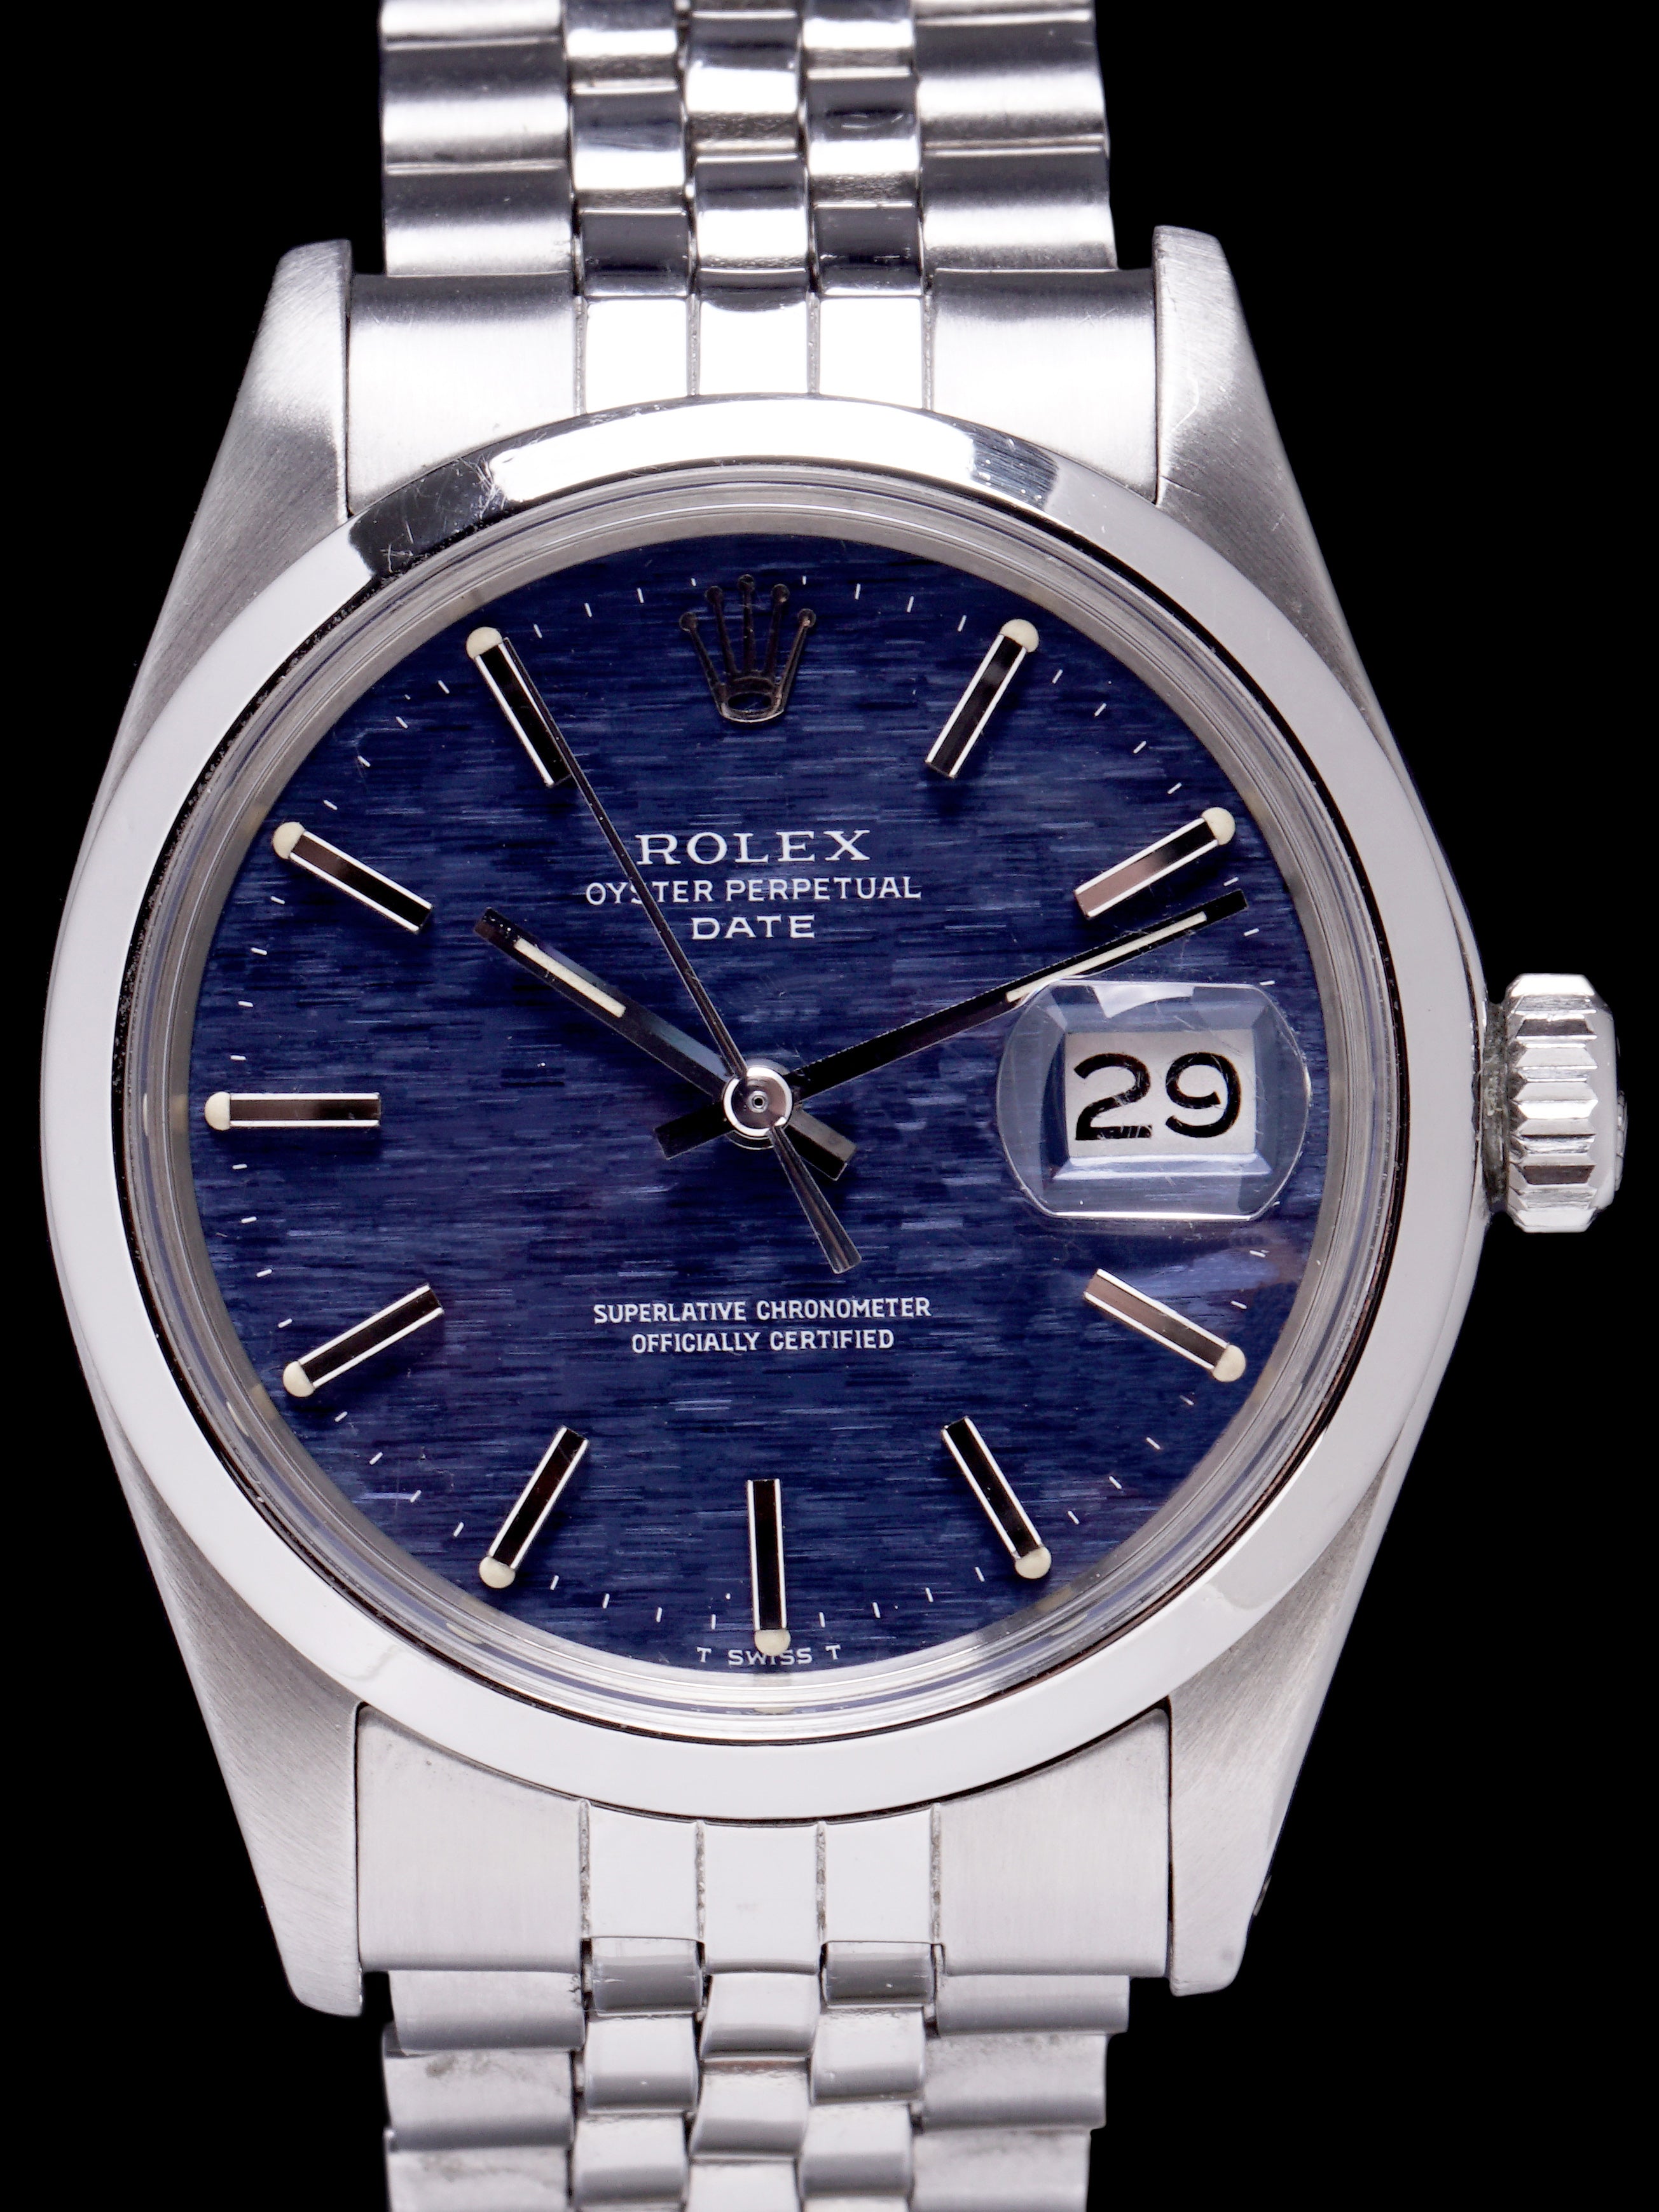 1971 Rolex Oyster Perpetual Date (Ref. 1500) Blue Mosaic Dial